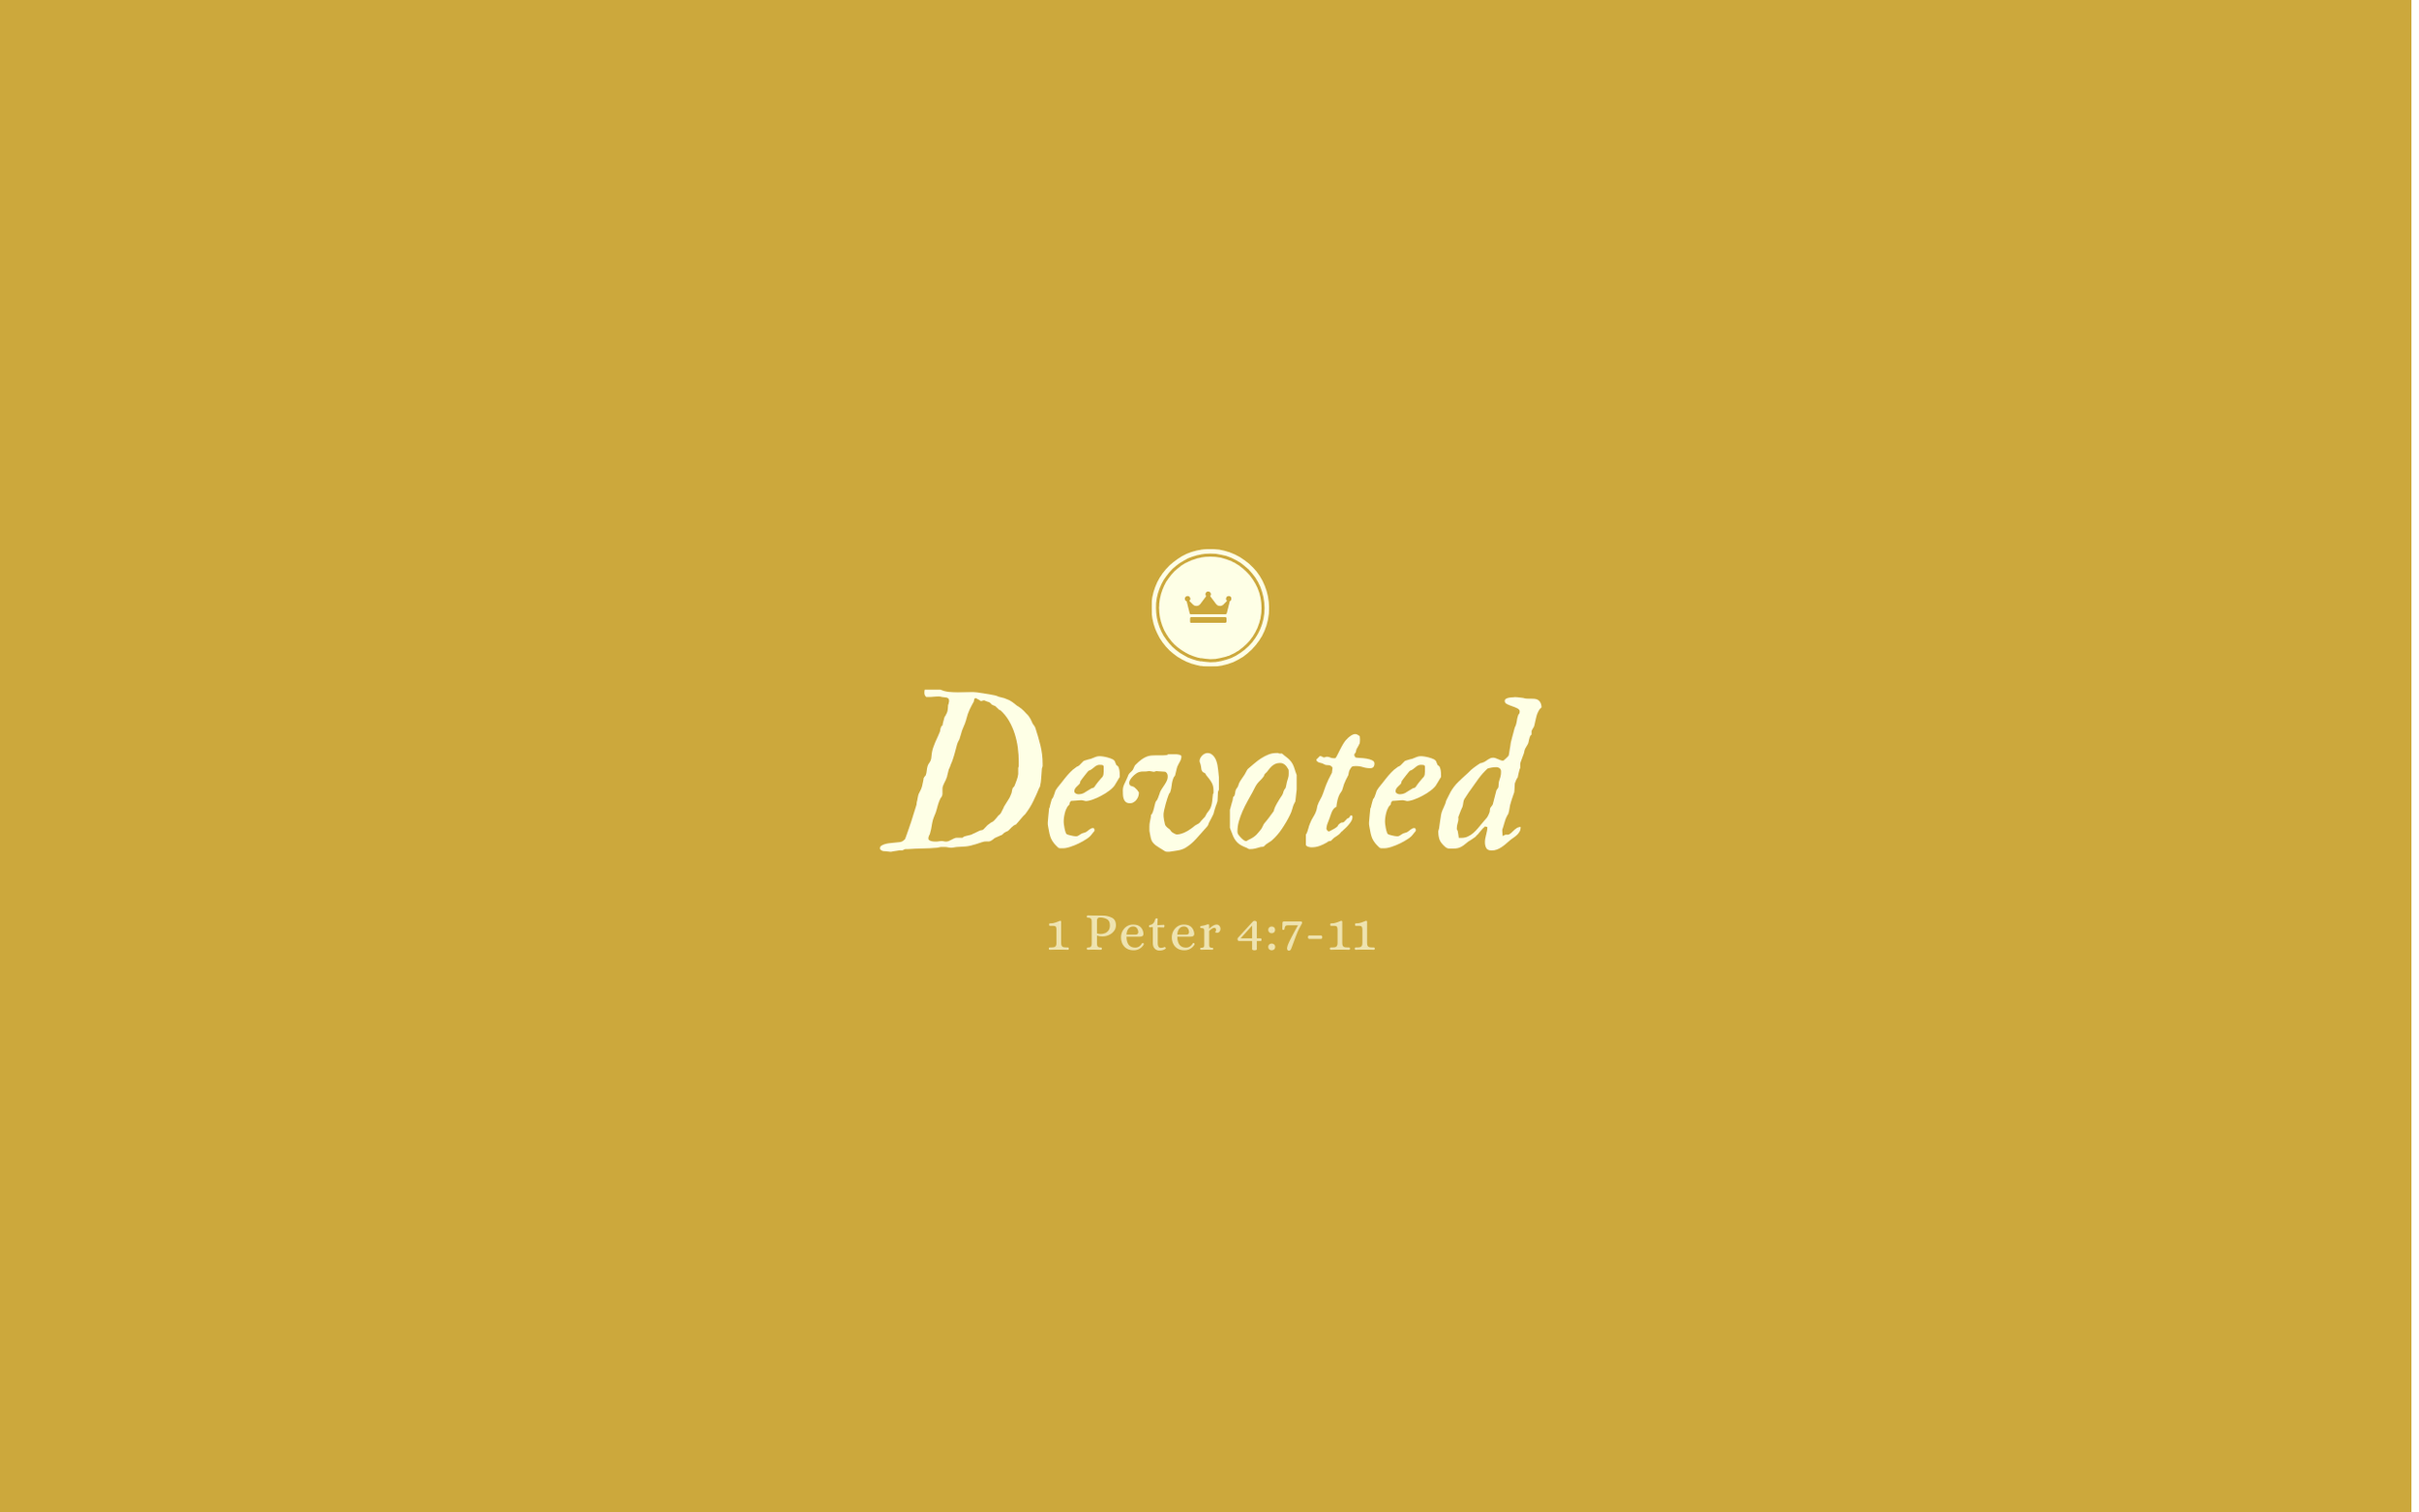 Devoted (2560 x 1600 px).png